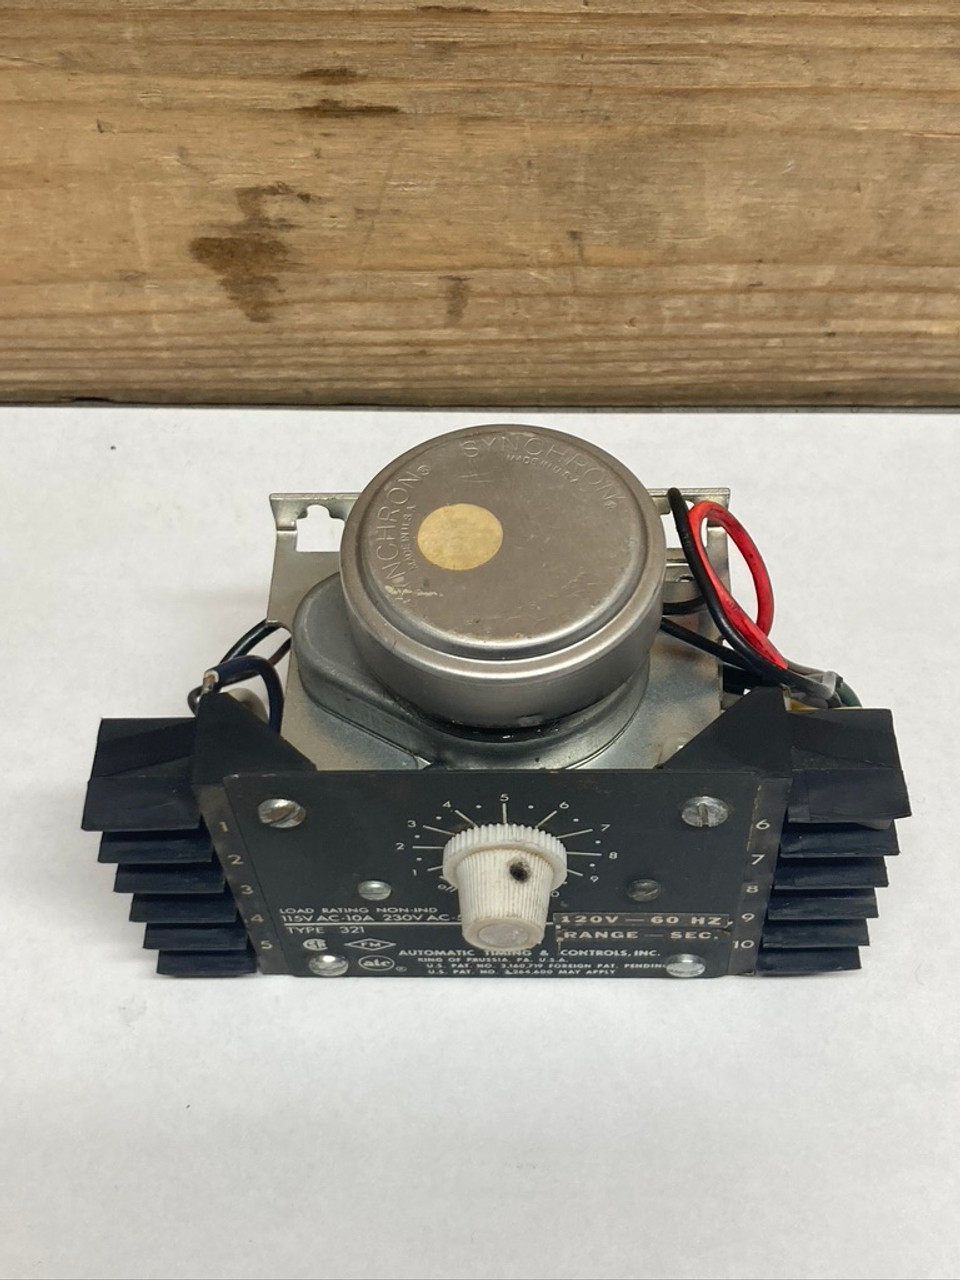 ATC Interval Time / Time Delay Relay Type 321 Automatic Timing & Controls